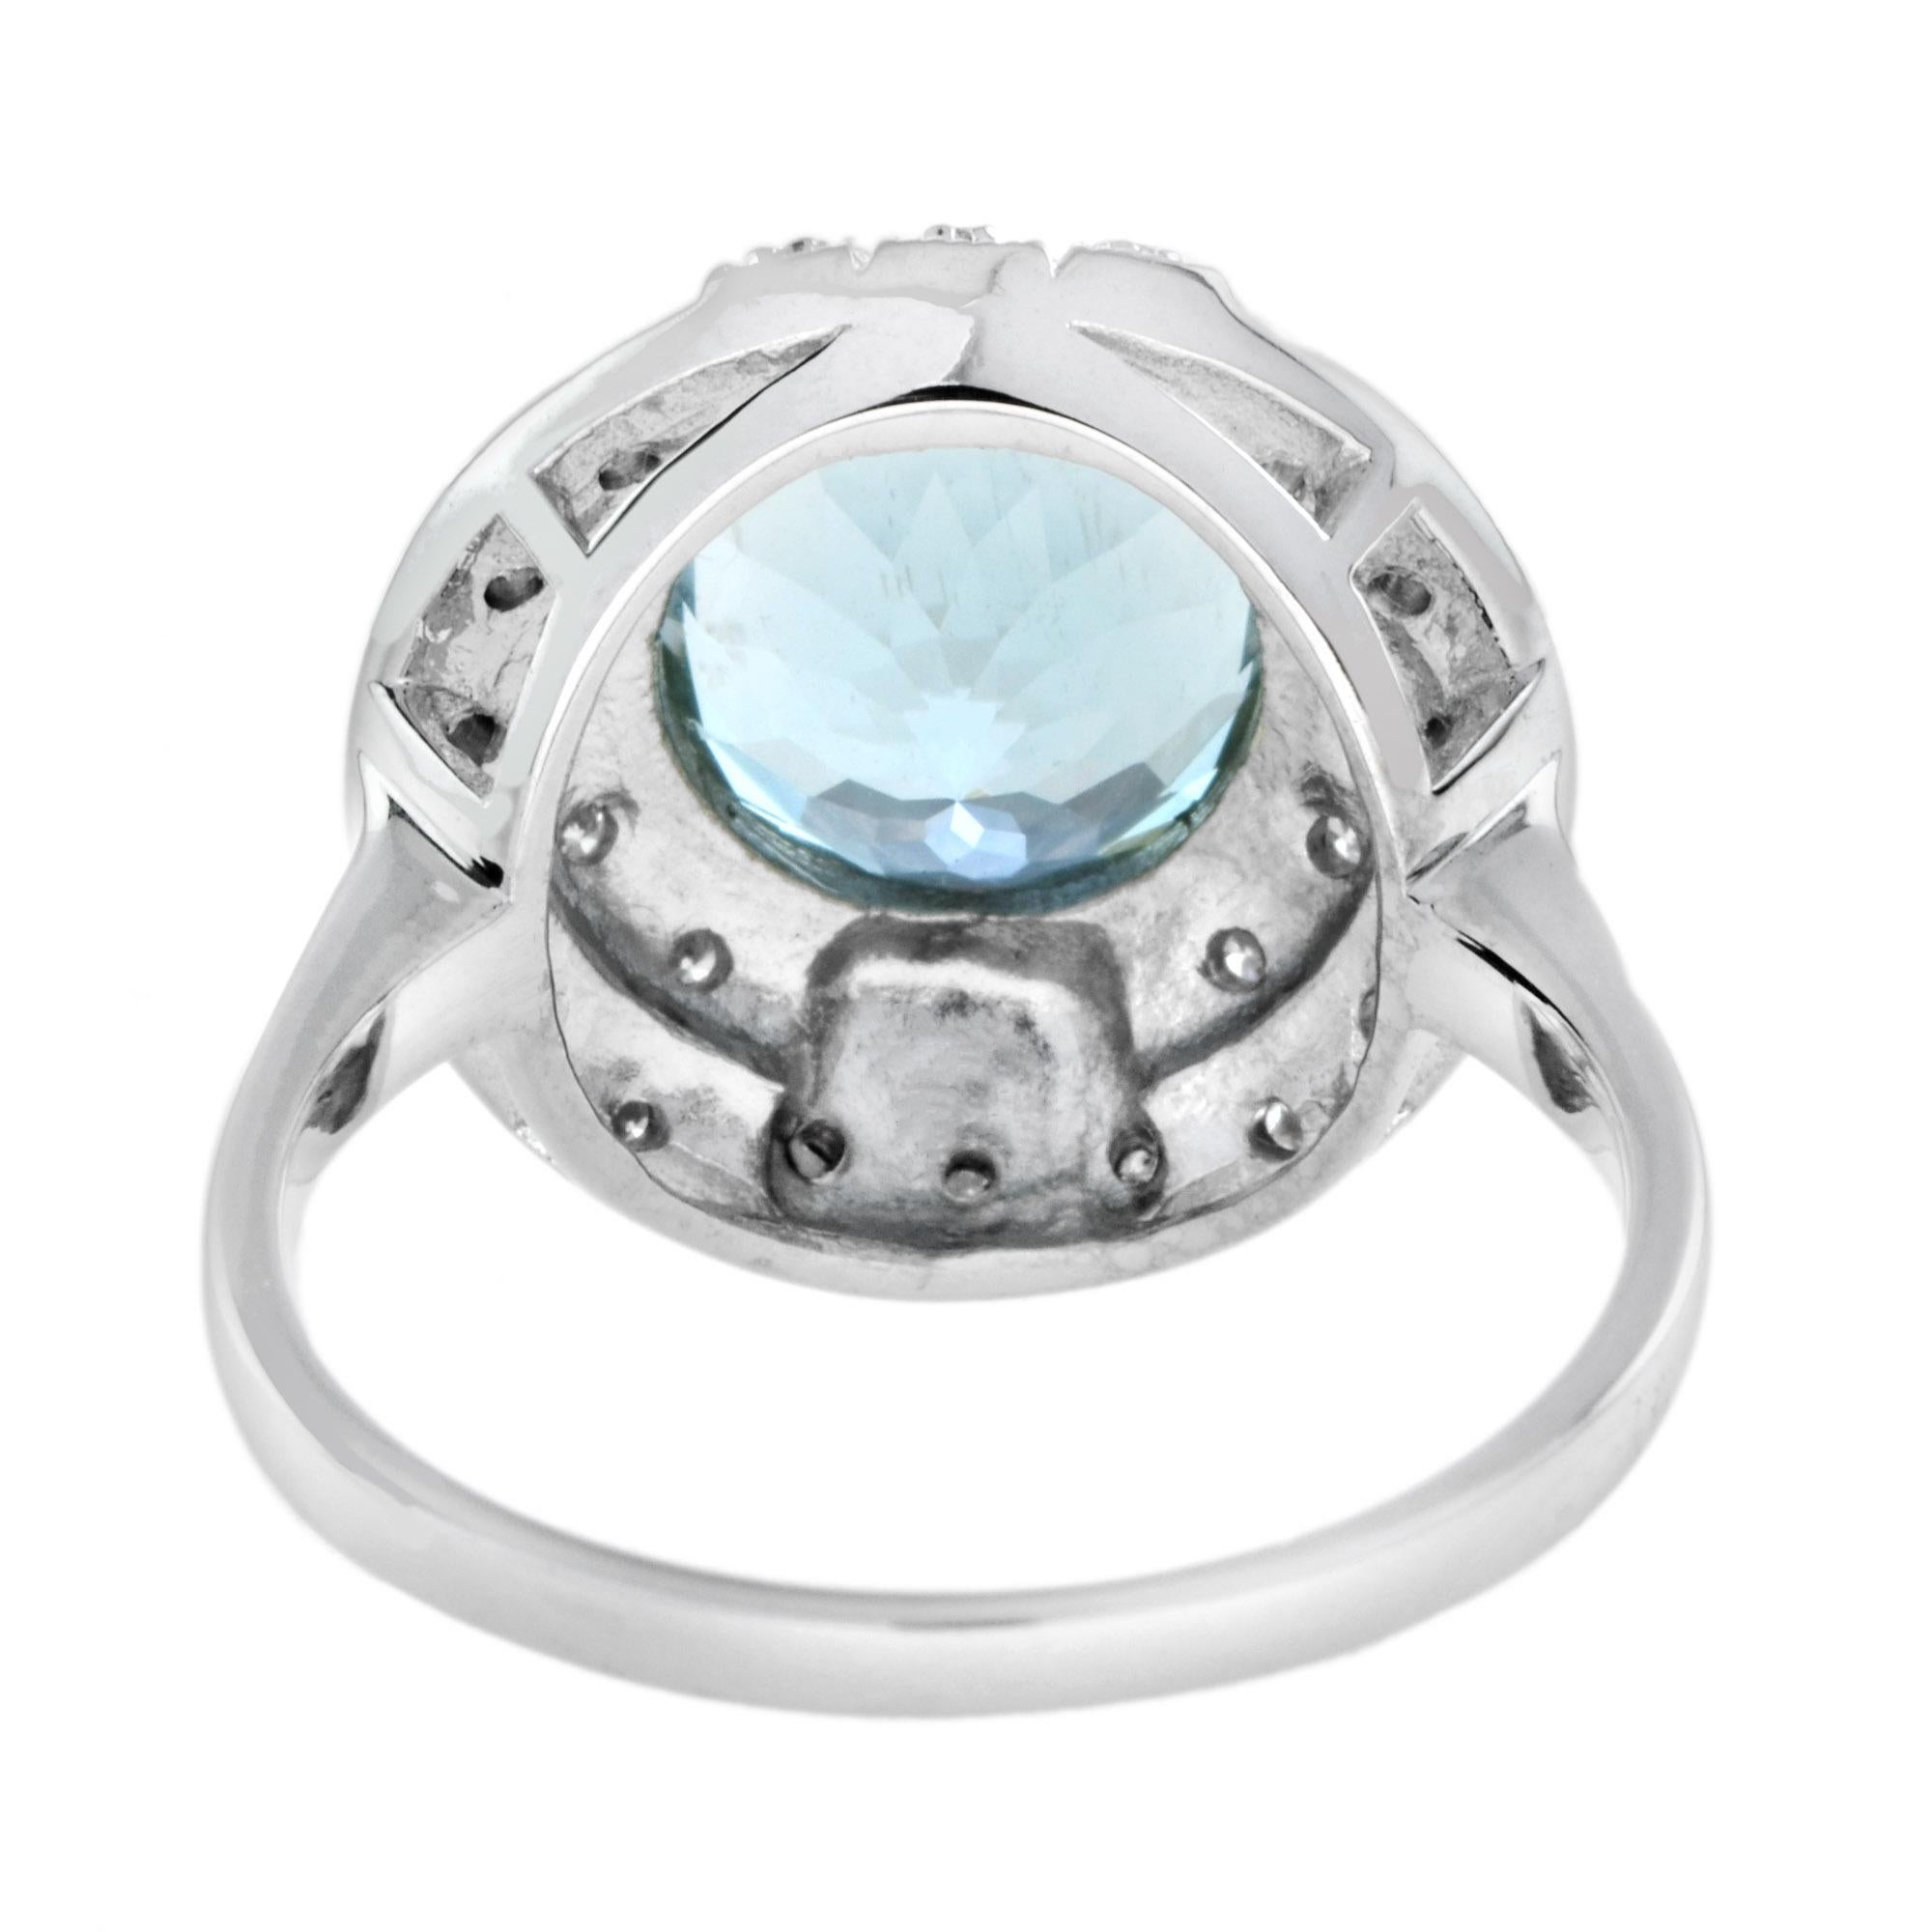 For Sale:  Extraordinary 2.2 Carats Aquamarine and Diamond Halo Ring in 18K White Gold 4